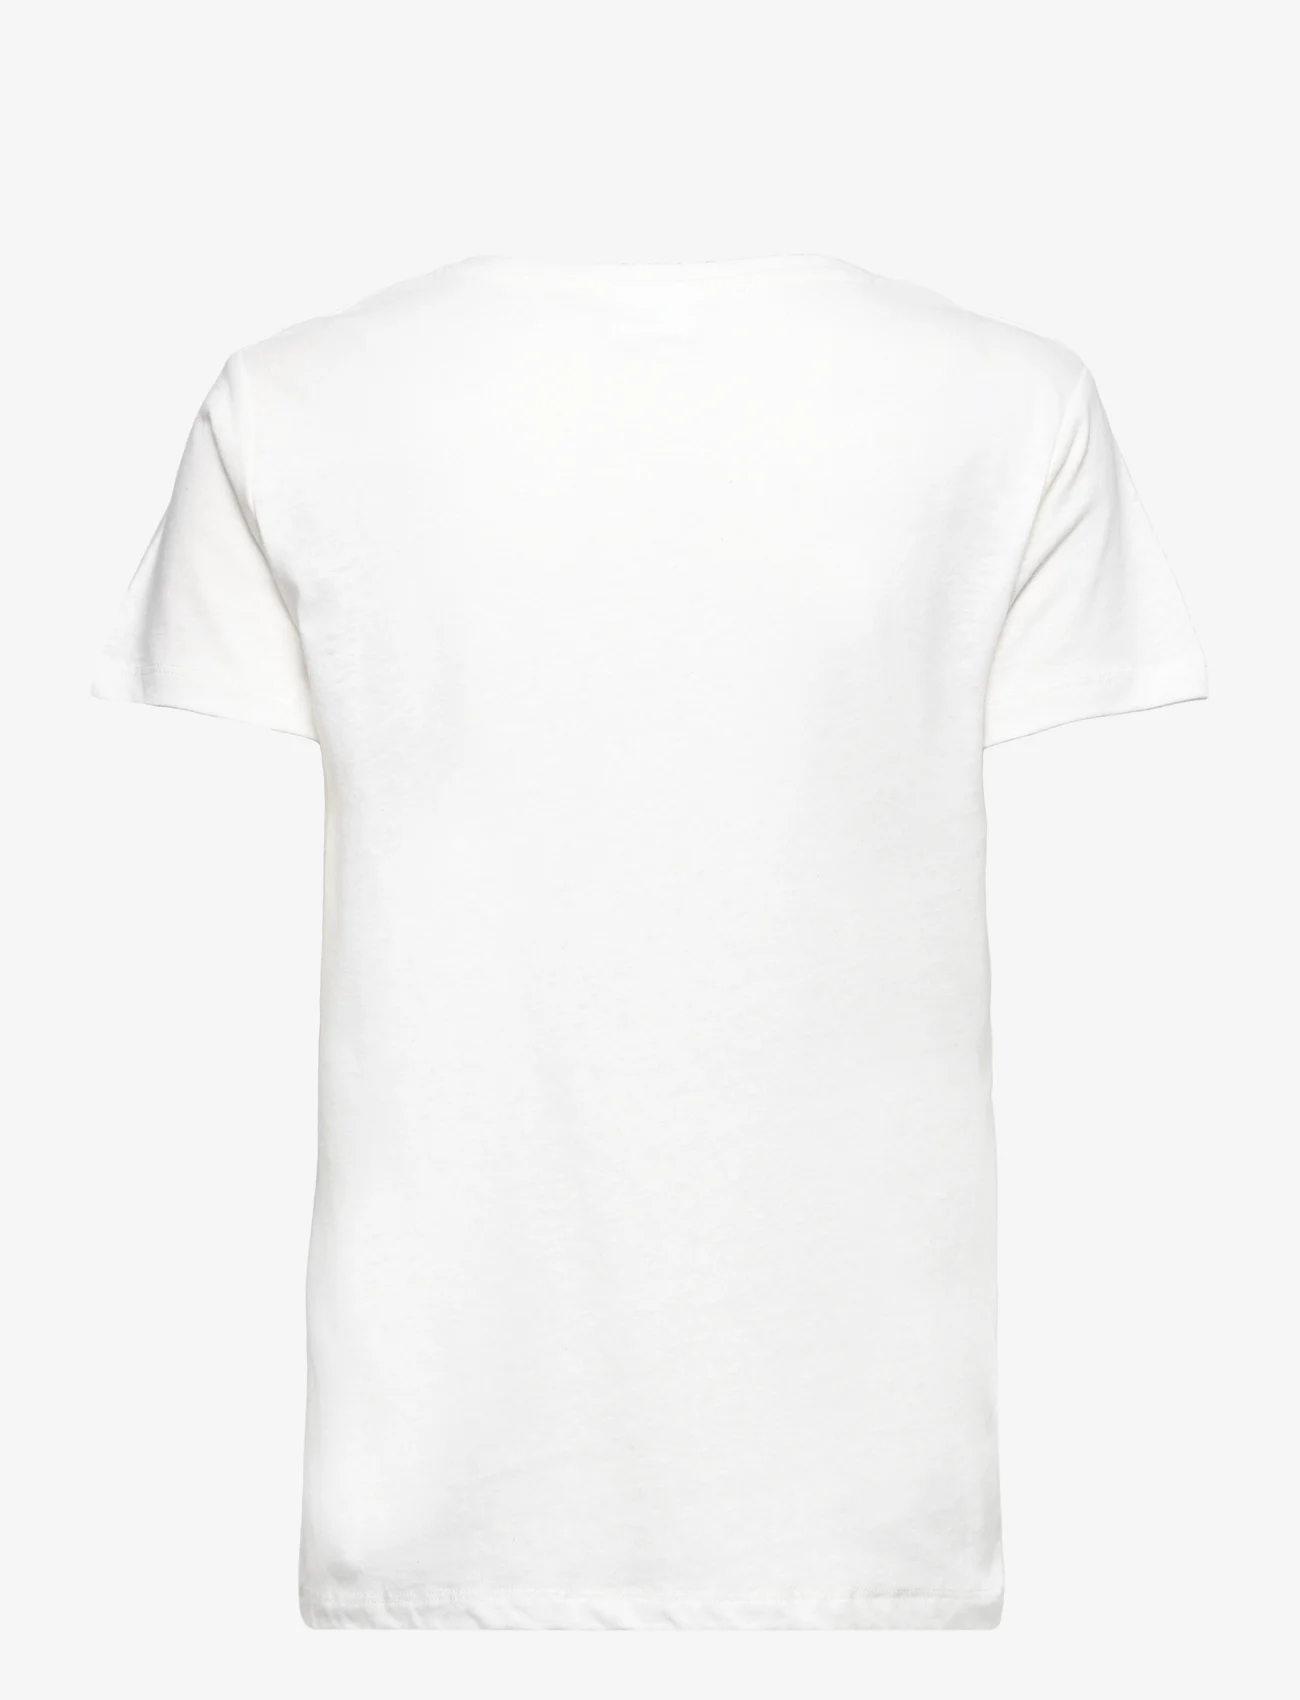 2NDDAY - 2ND Beverly - Essential Linen Jersey - t-shirts - bright white - 1